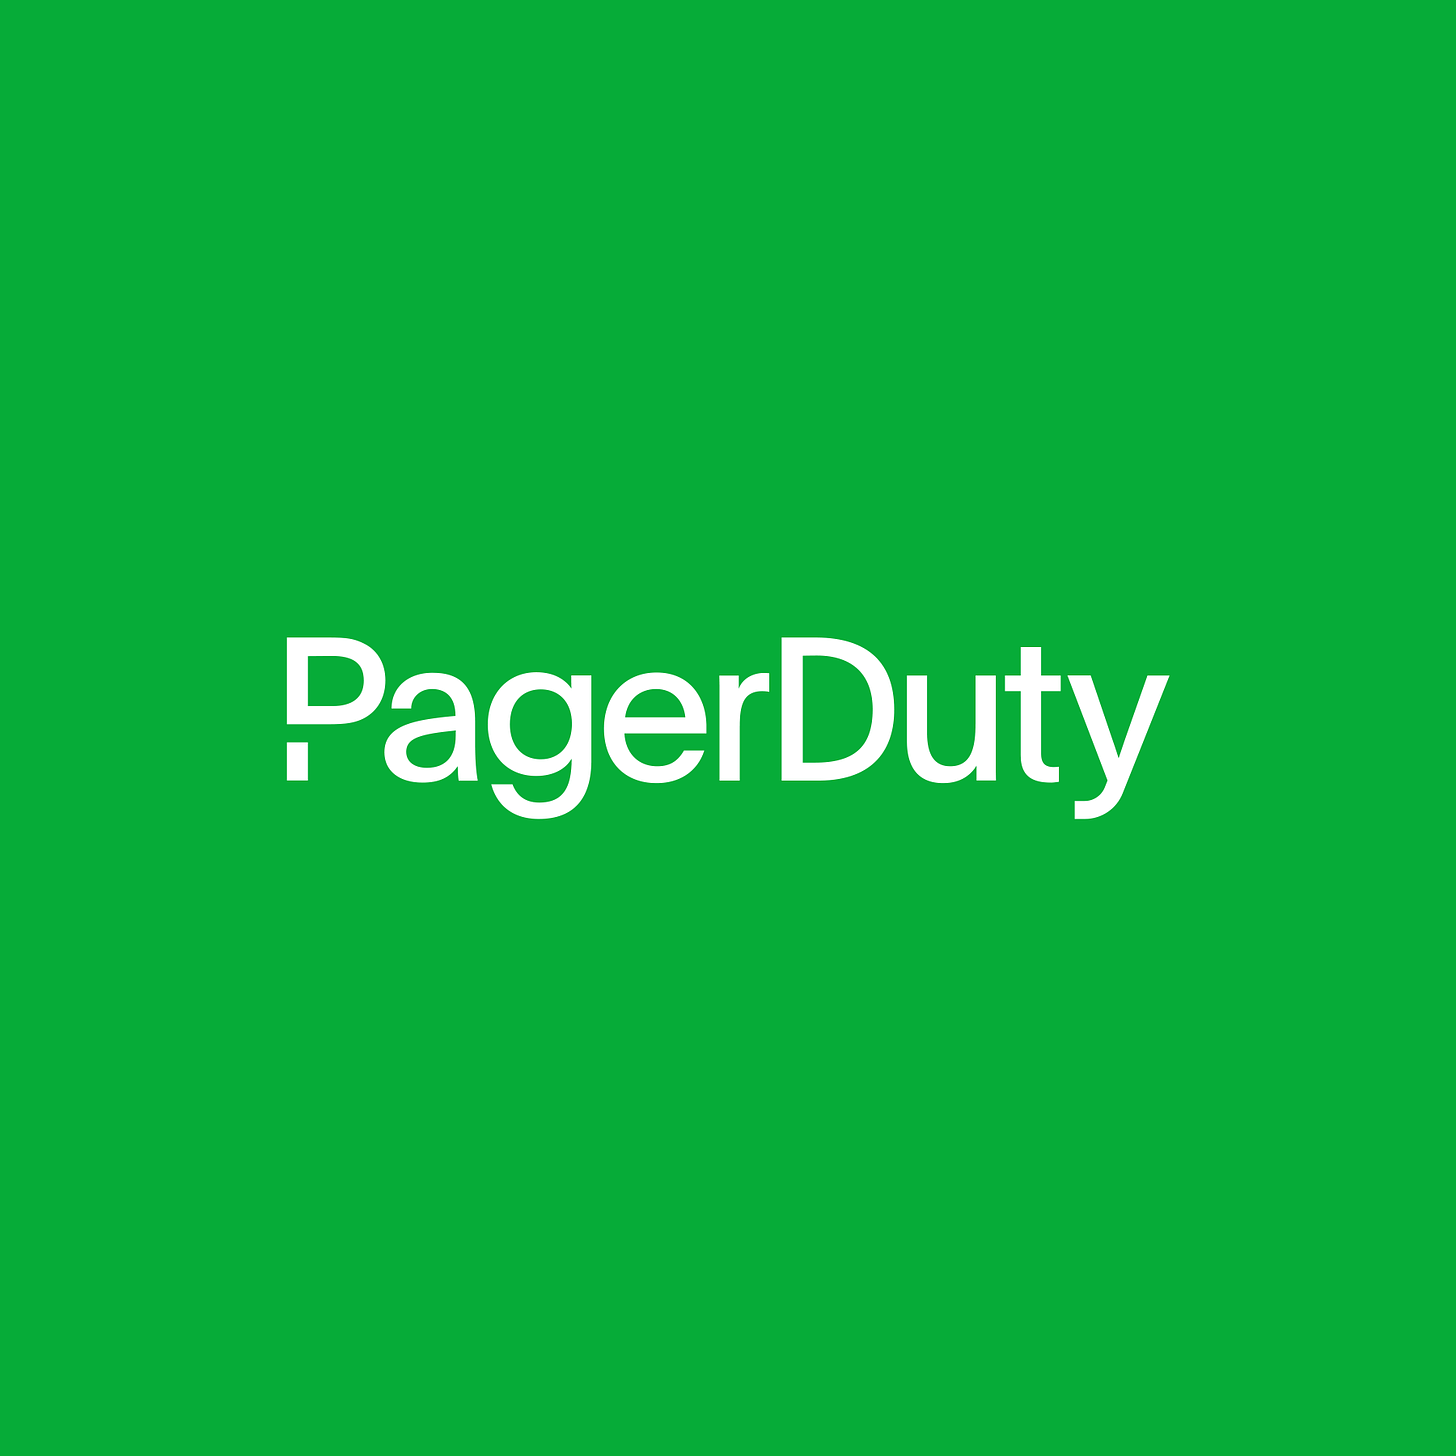 Resources | PagerDuty